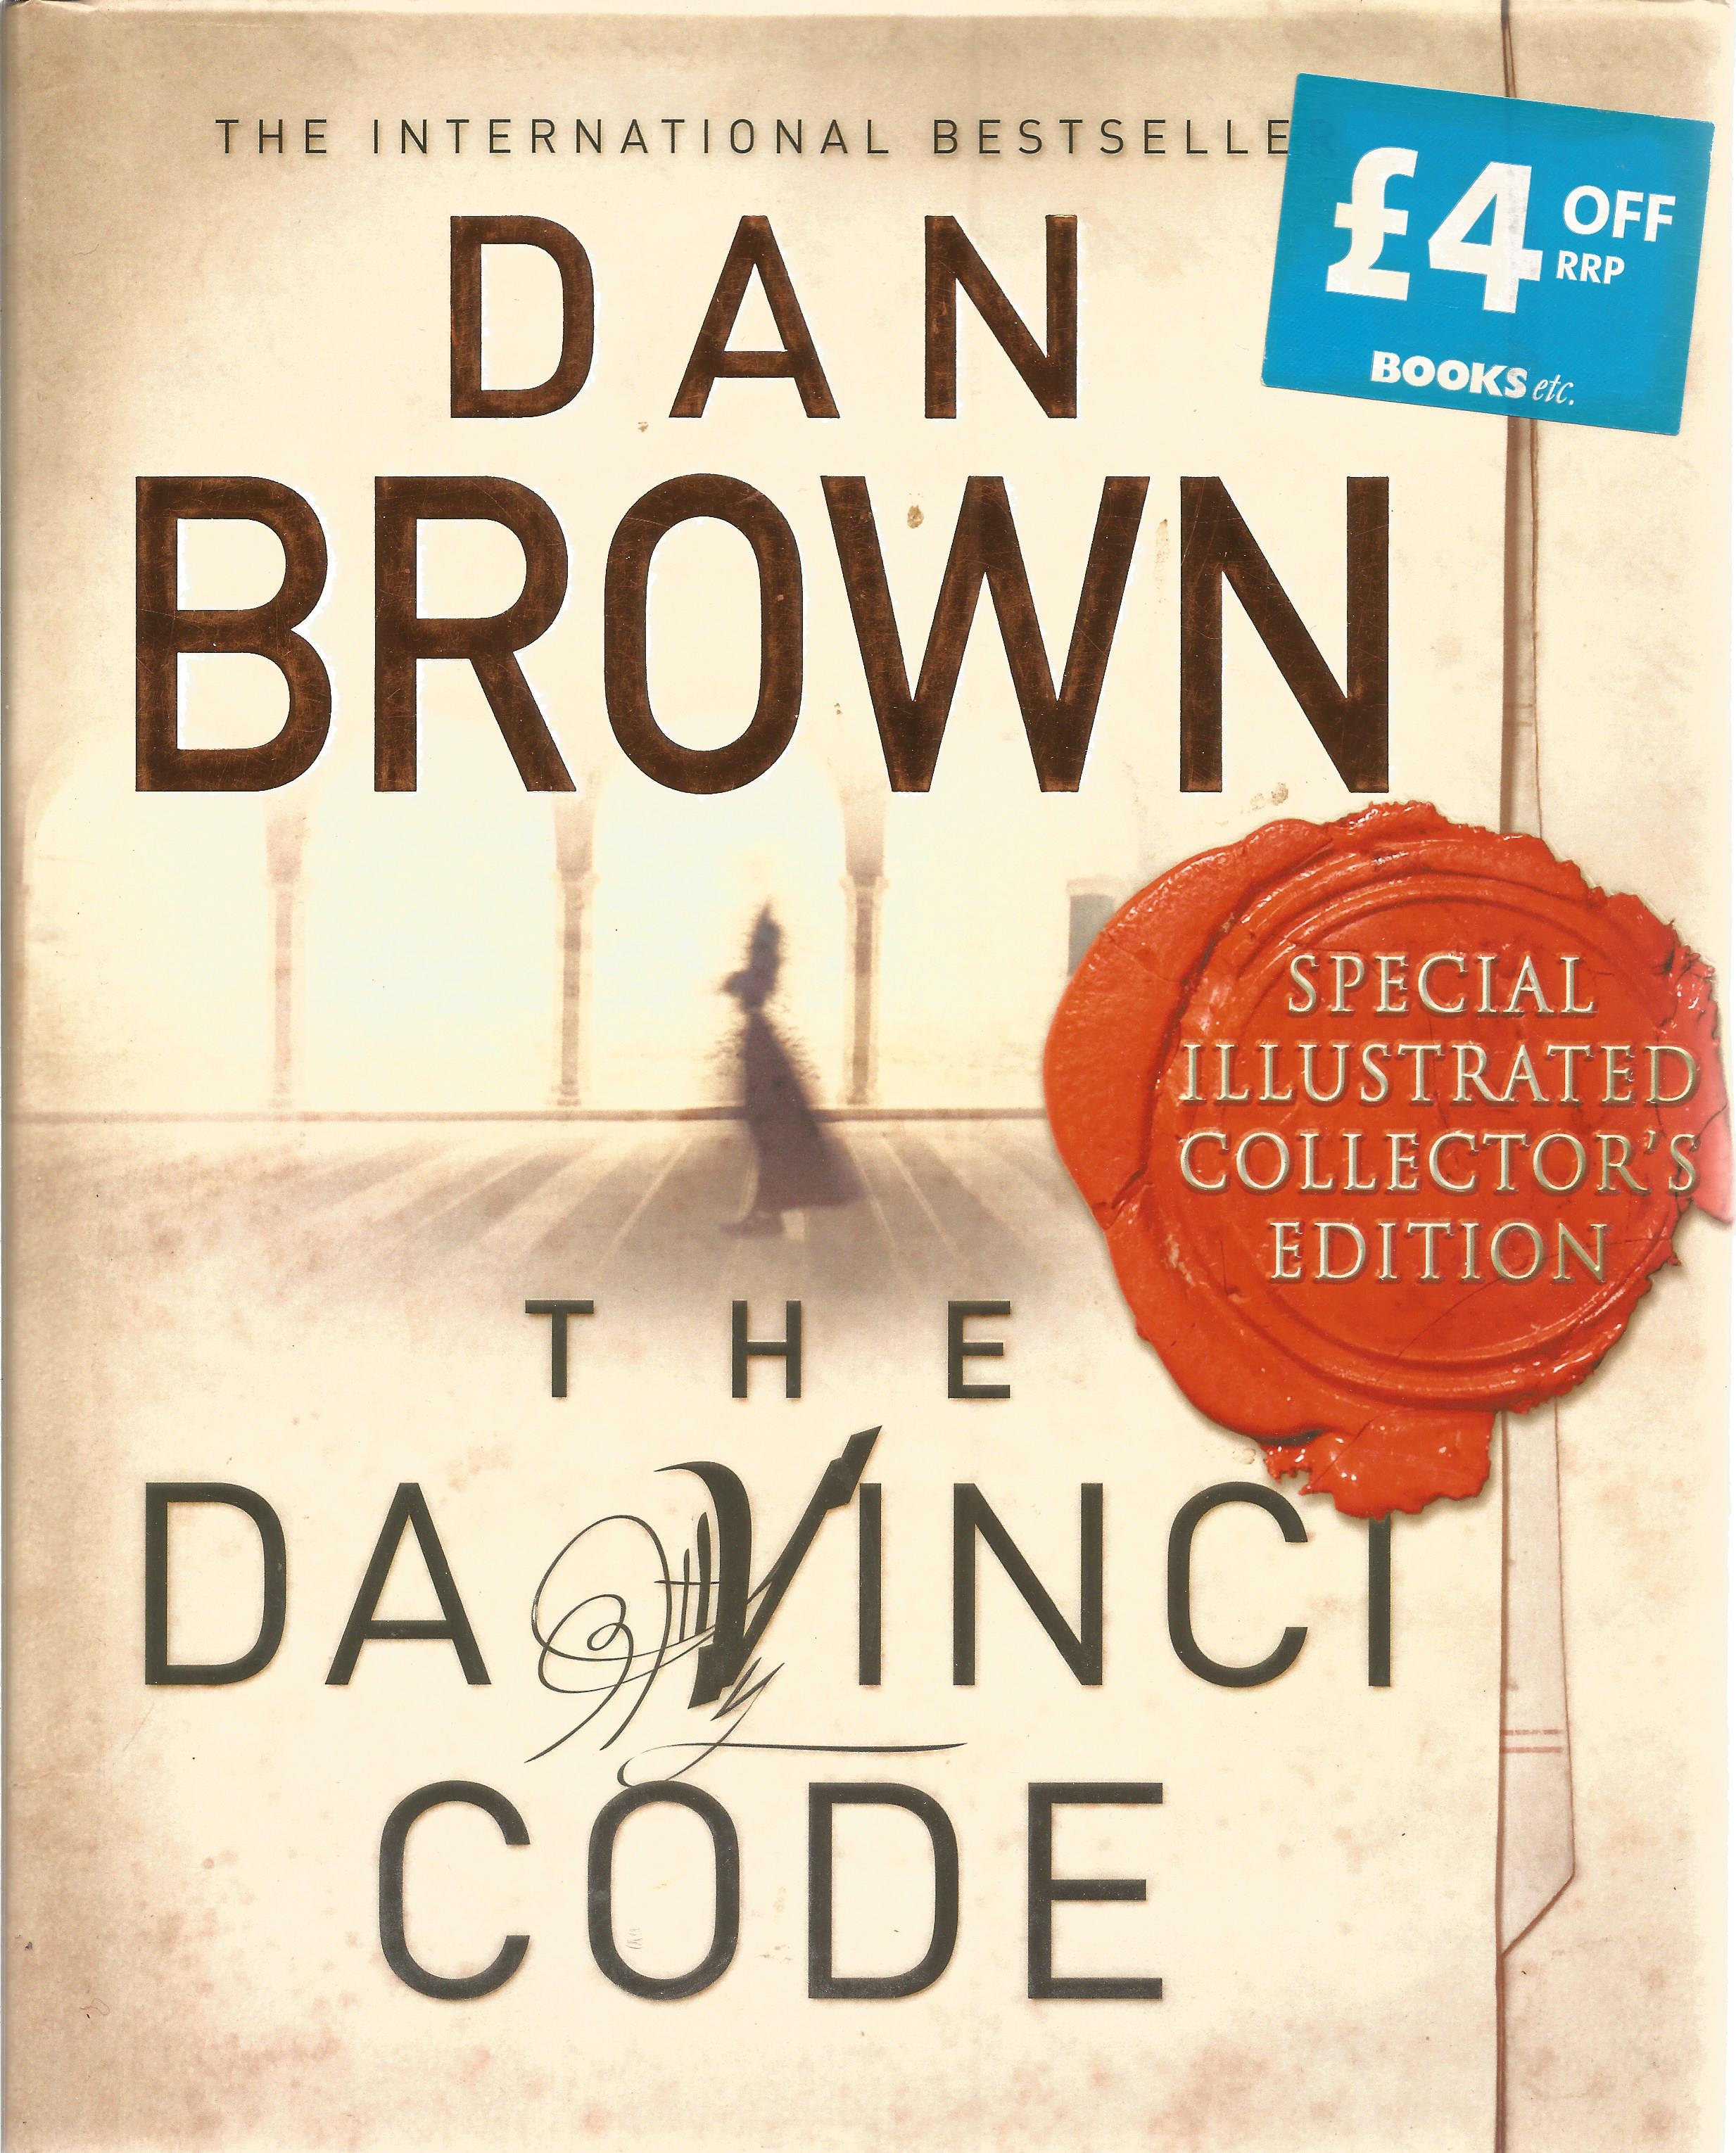 The Da Vinci Code by Dan Brown Hardback Book 2004 Special Illustrated Edition published by Bantam